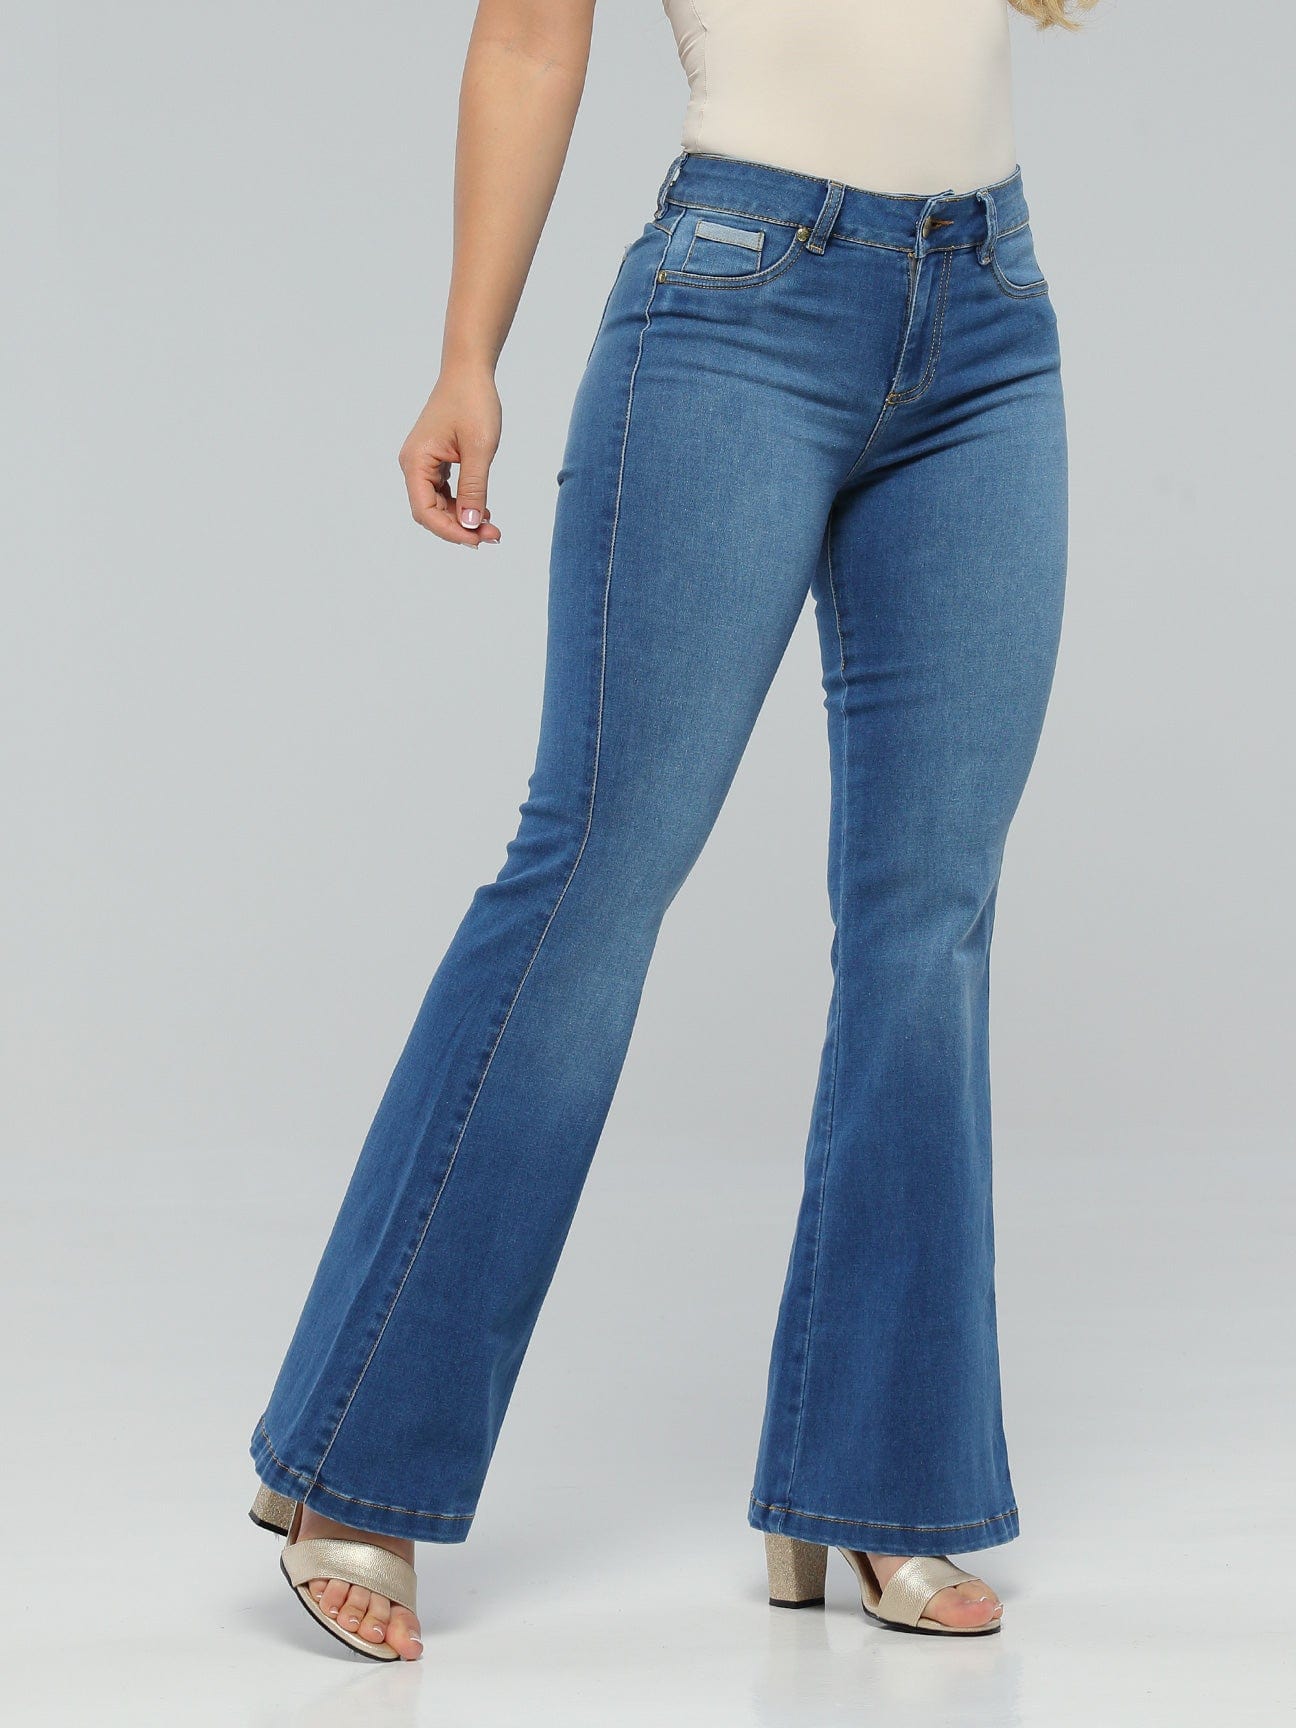 Ace of Hearts Butt Lift Jeans 14262